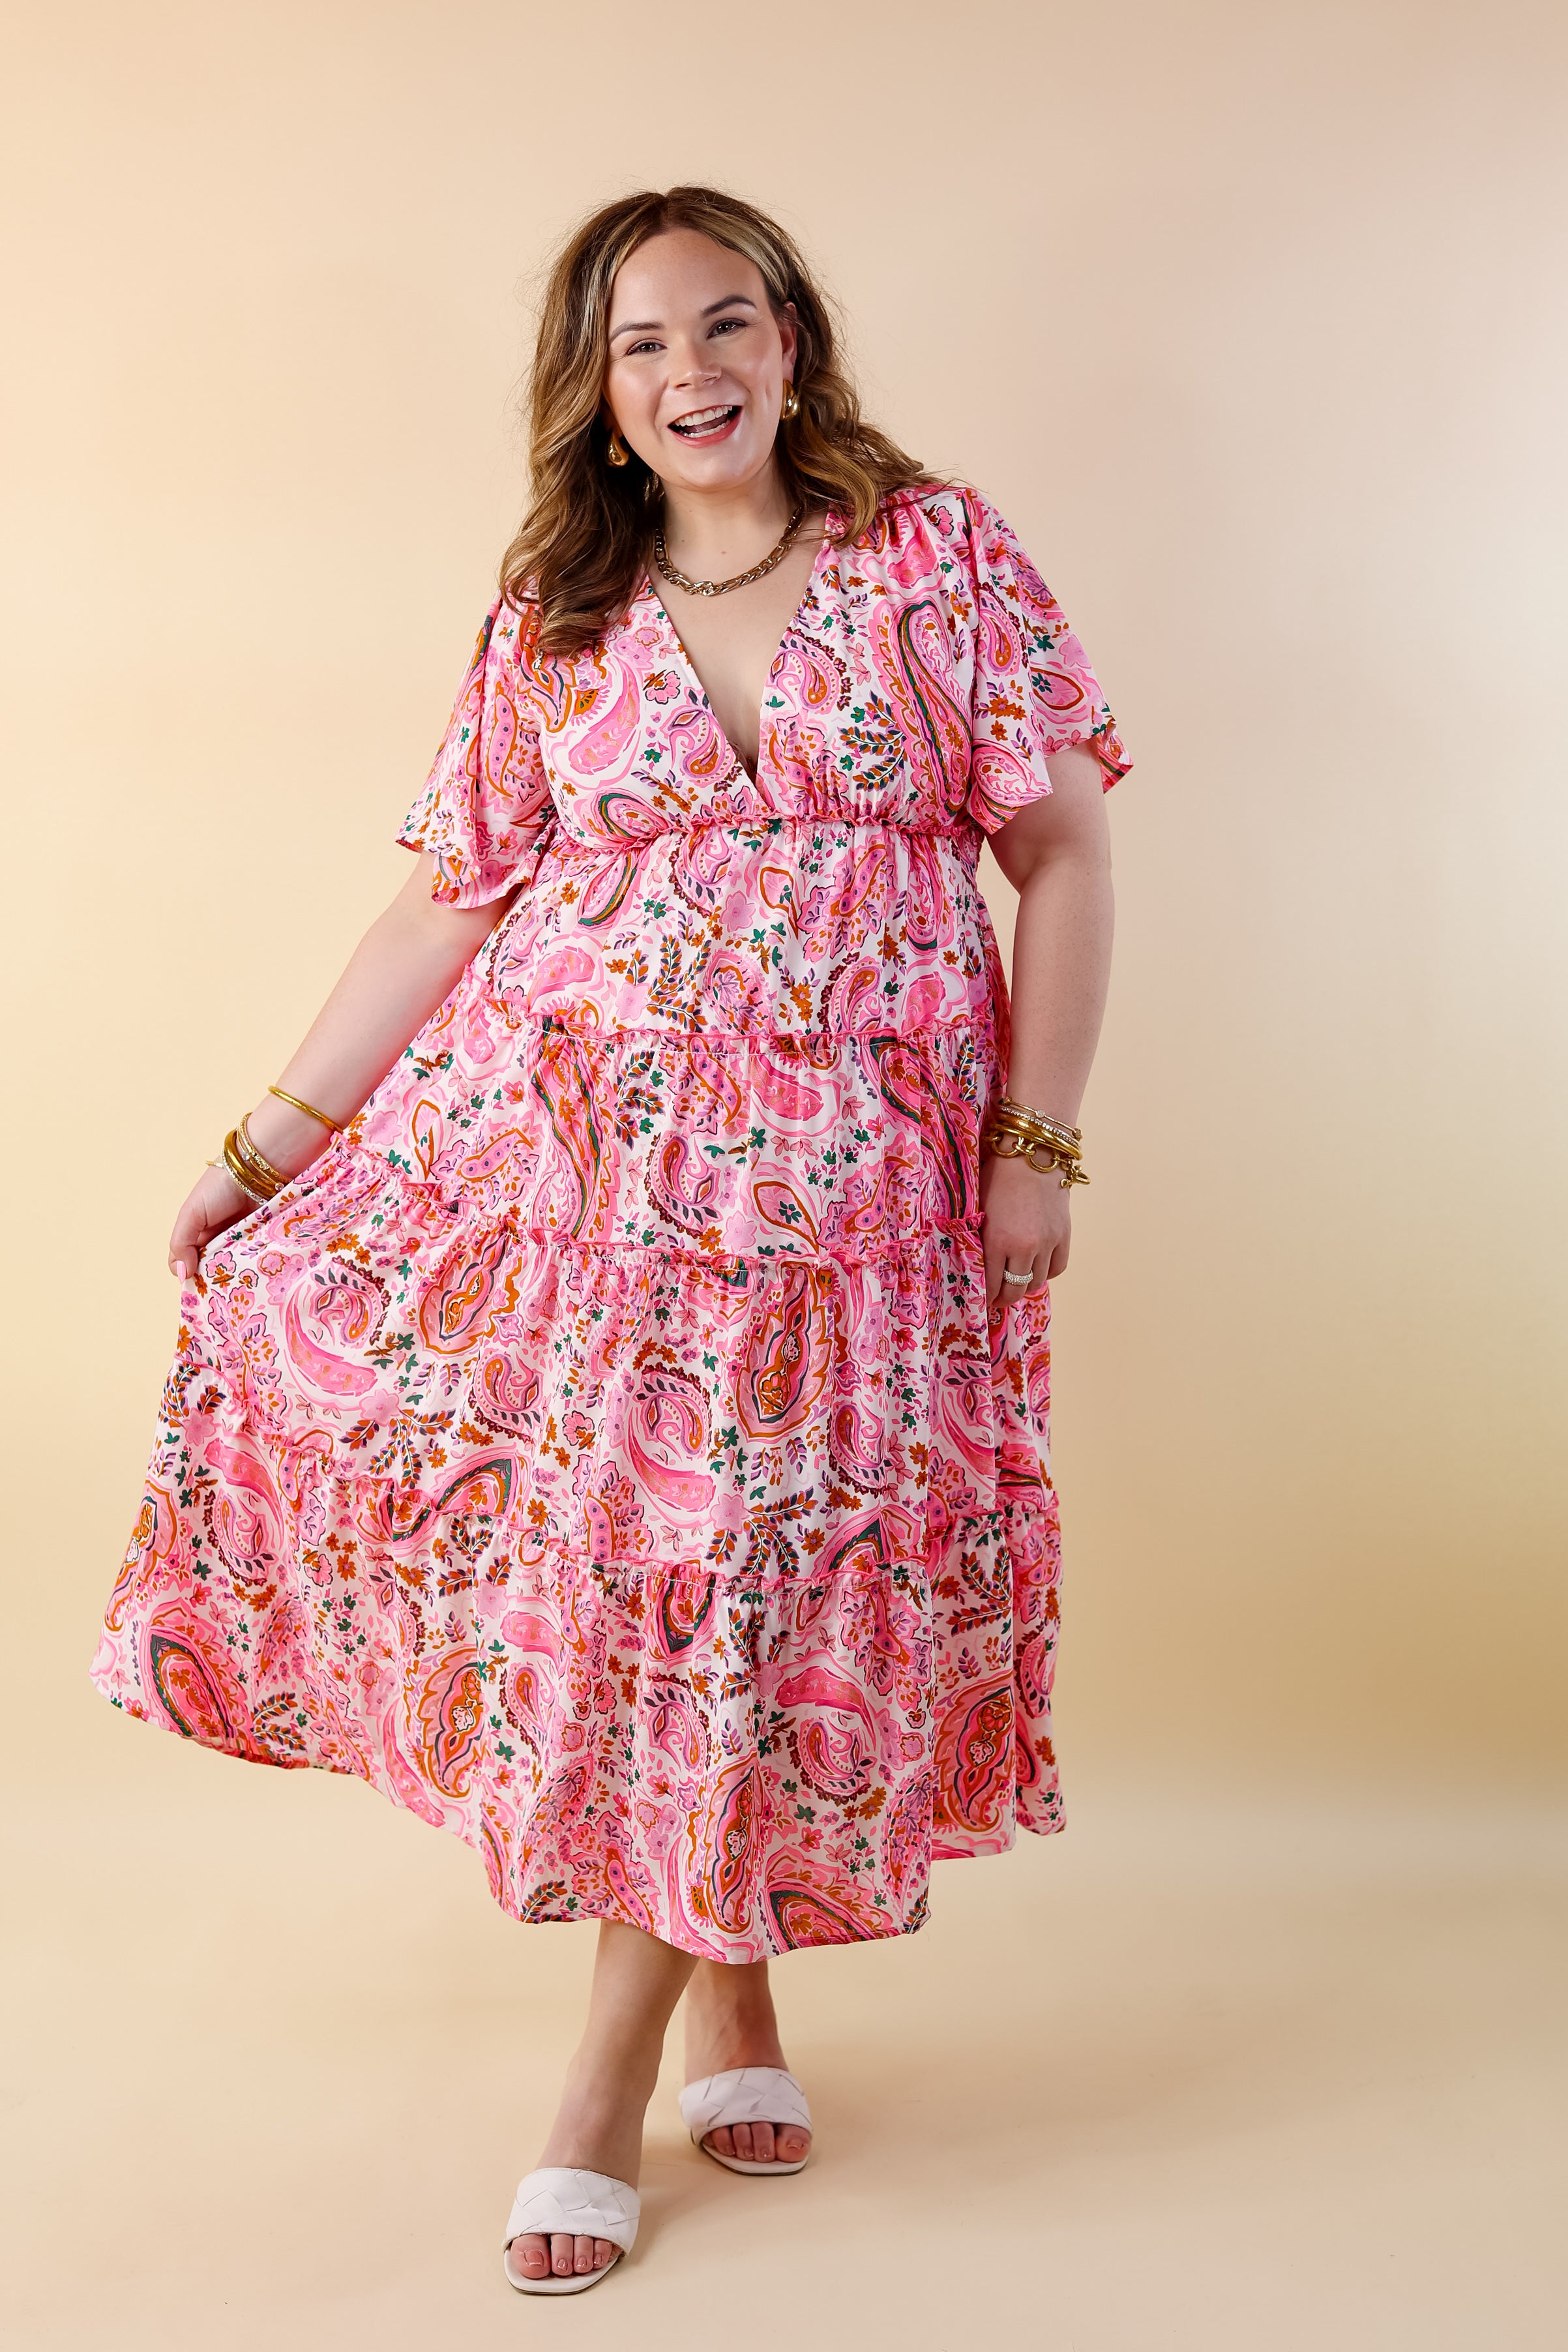 Whispers of Wisteria Paisley Tiered Midi Dress in Pink Mix - Giddy Up Glamour Boutique